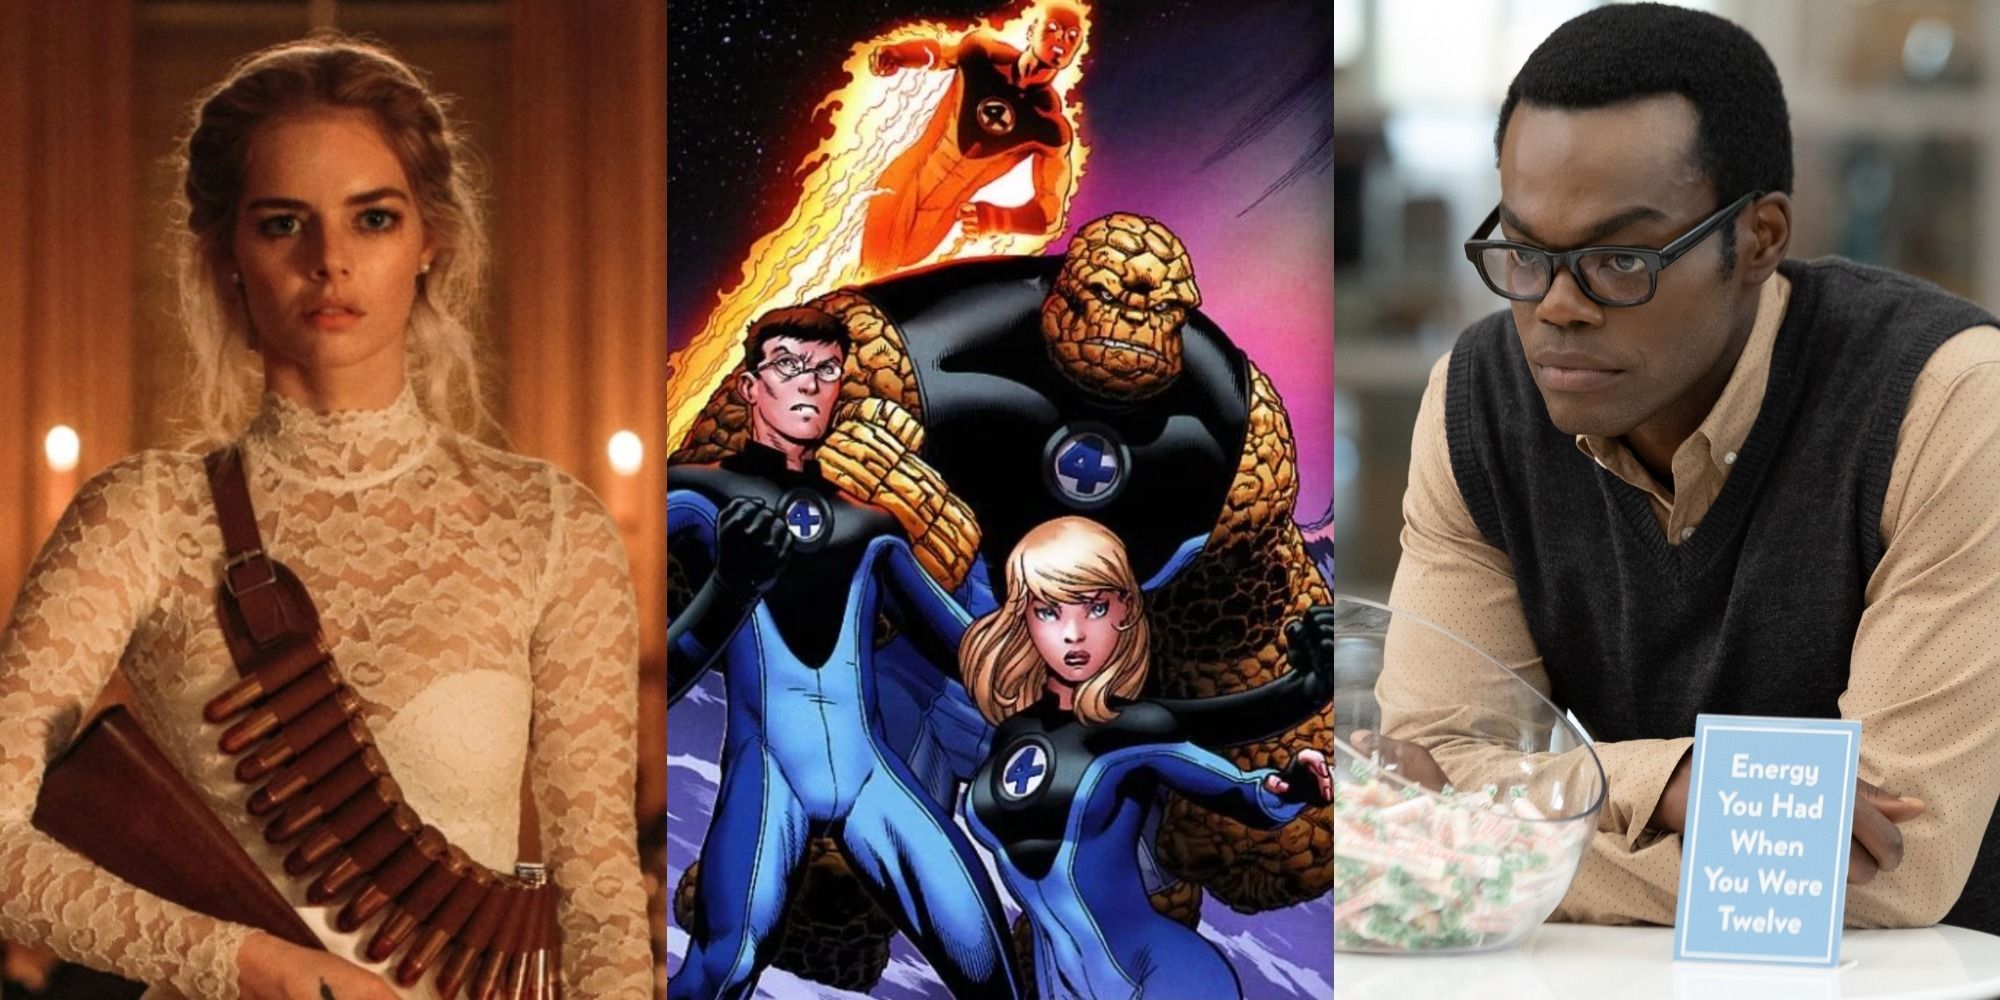 Fantastic Four Fan Casting The Mcu Movie With Actors Other Than Jlaw